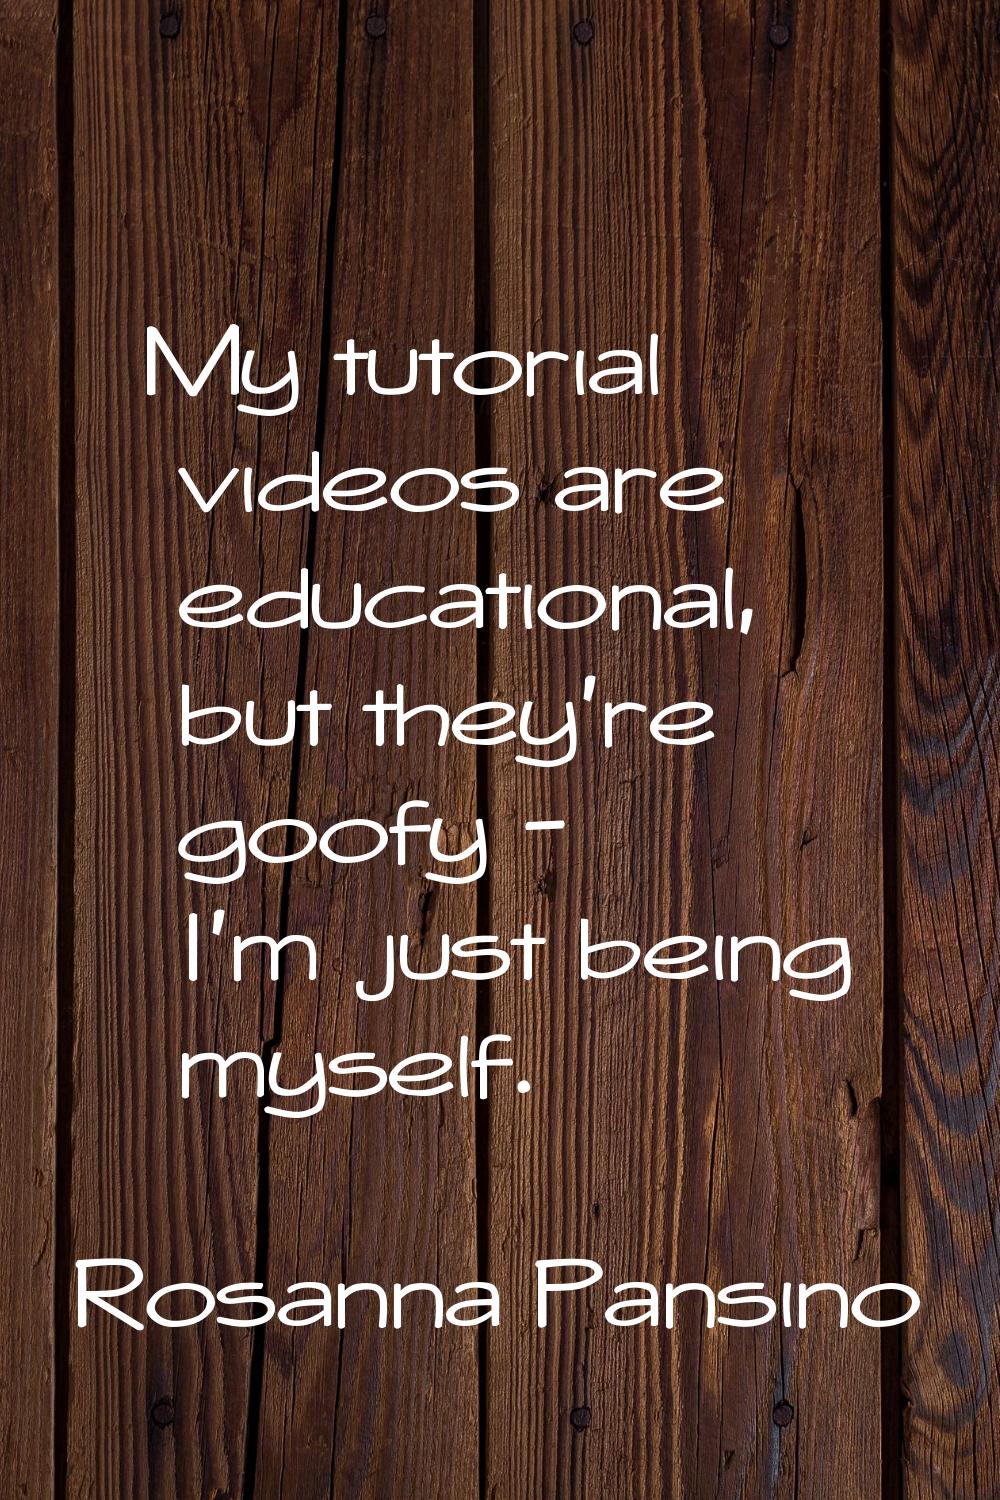 My tutorial videos are educational, but they're goofy - I'm just being myself.